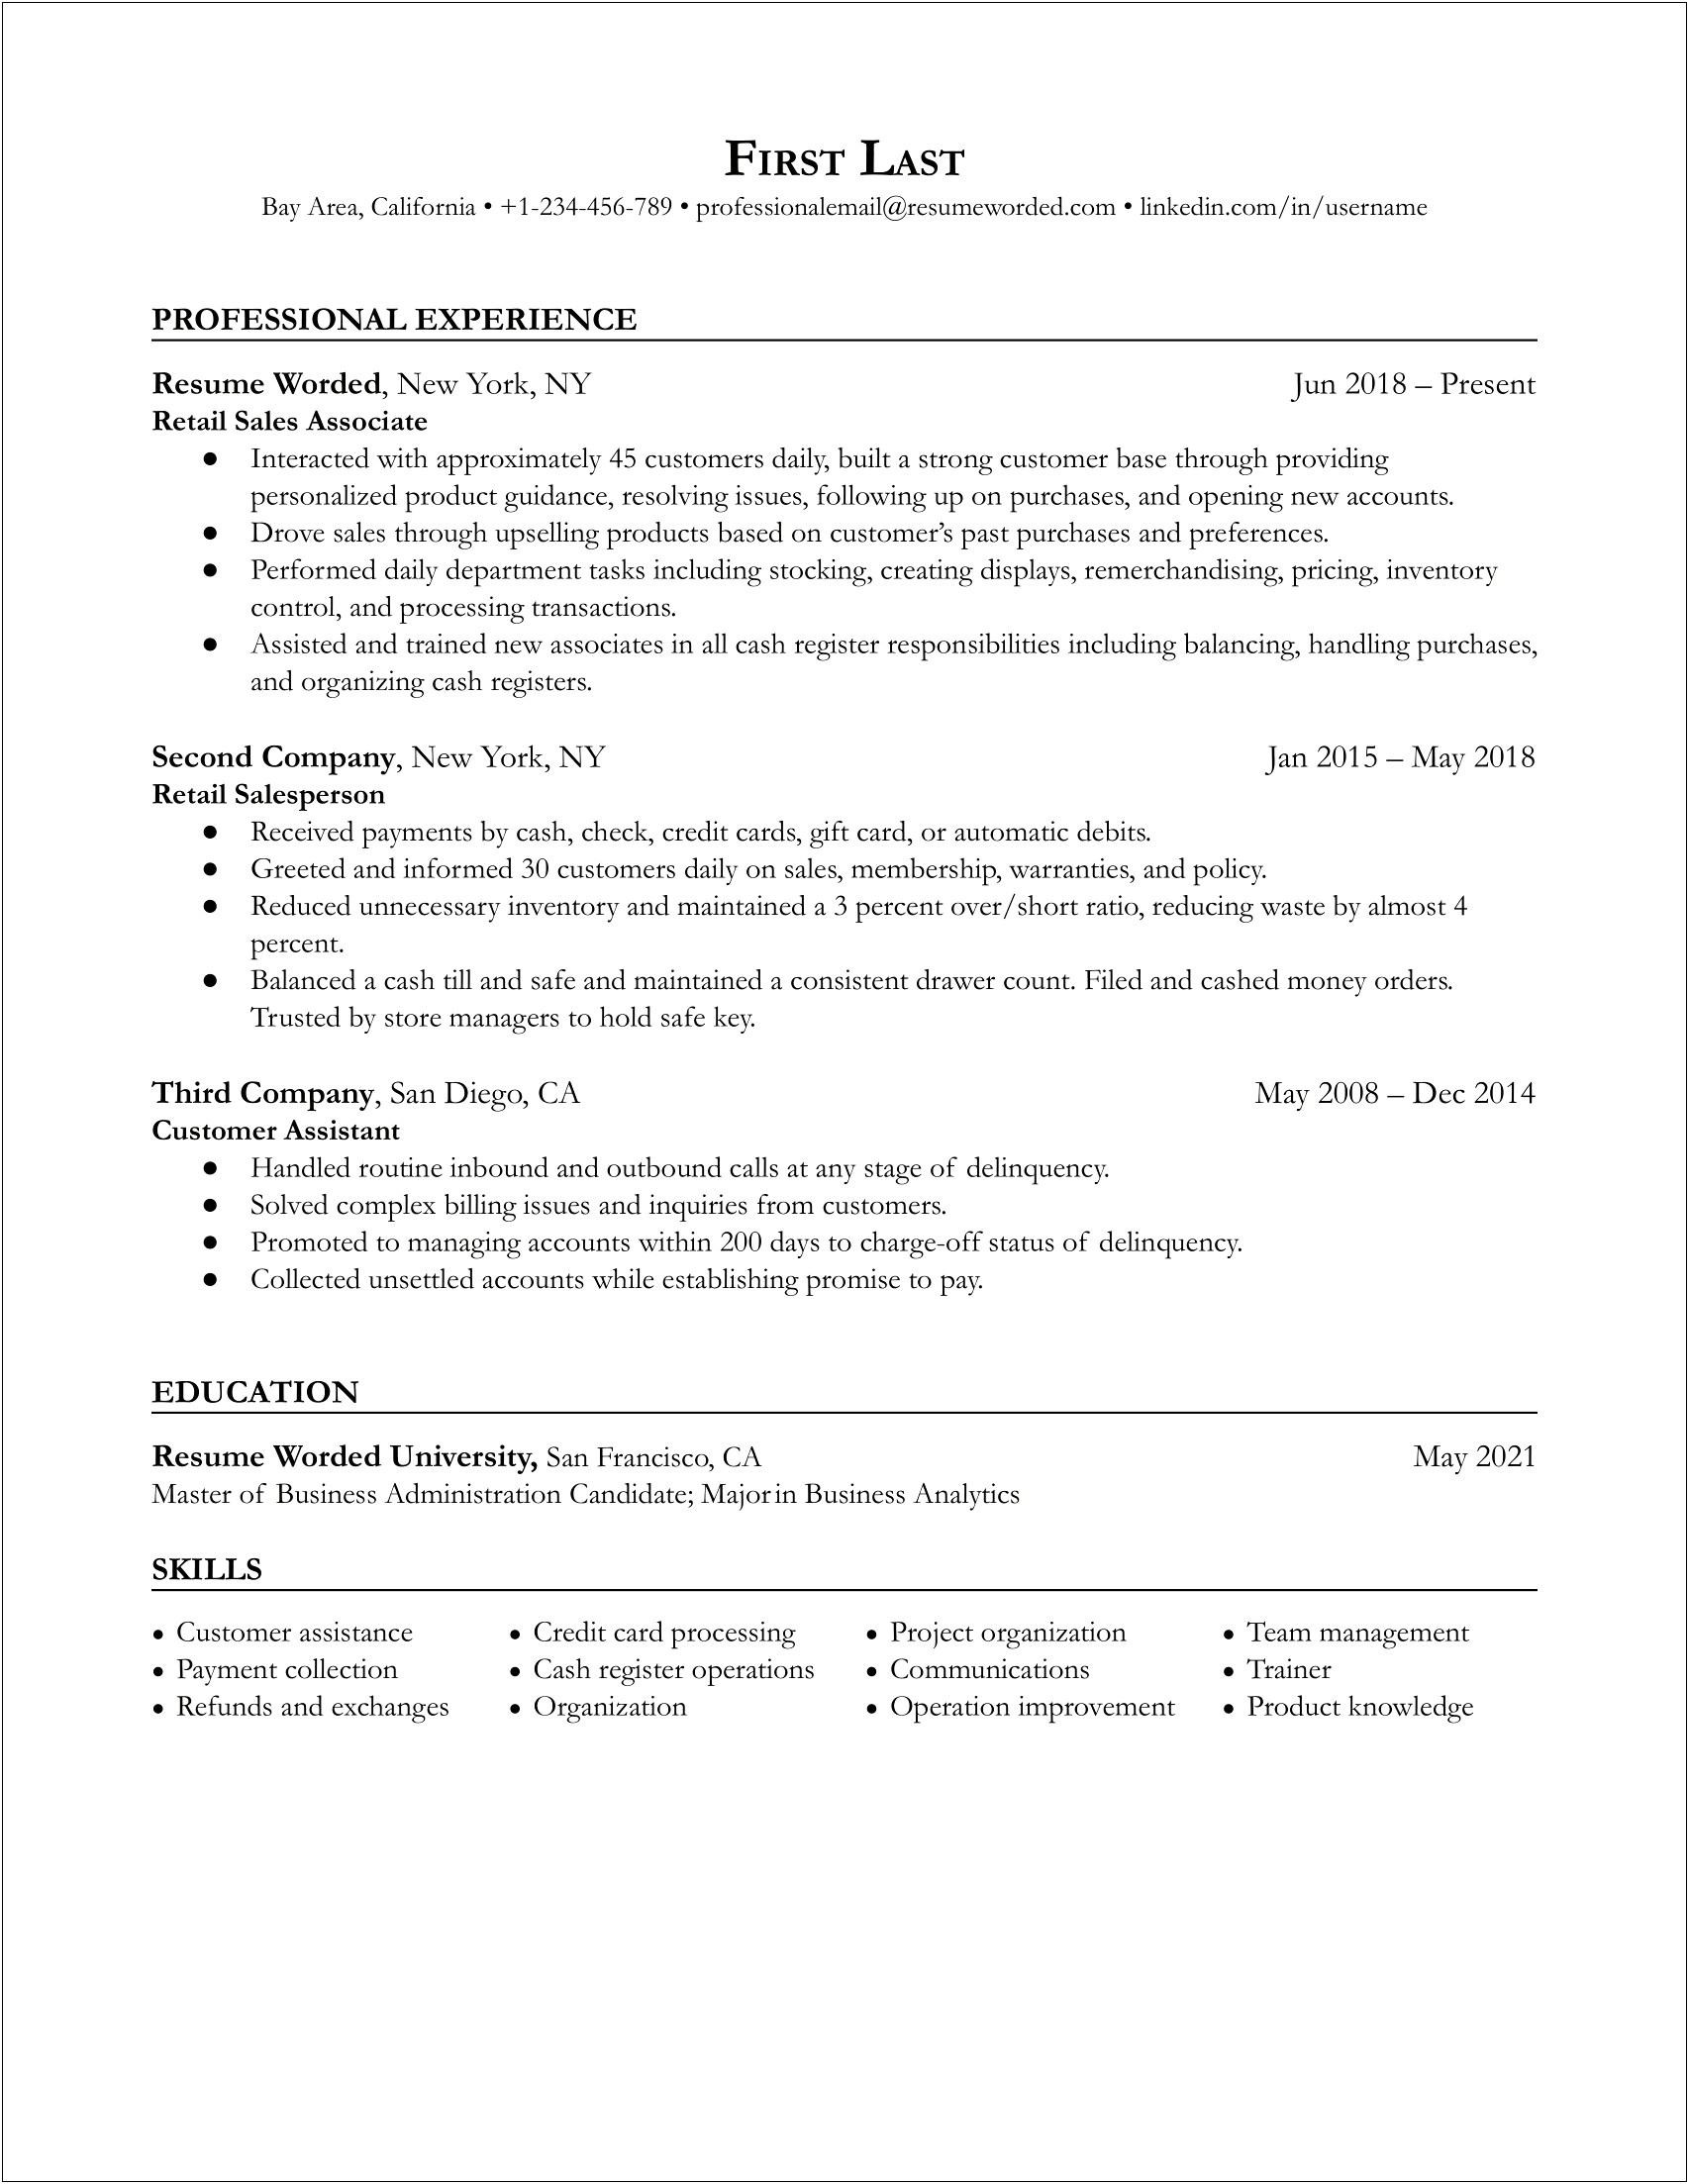 Commision Sales Associate Objective For A Resume